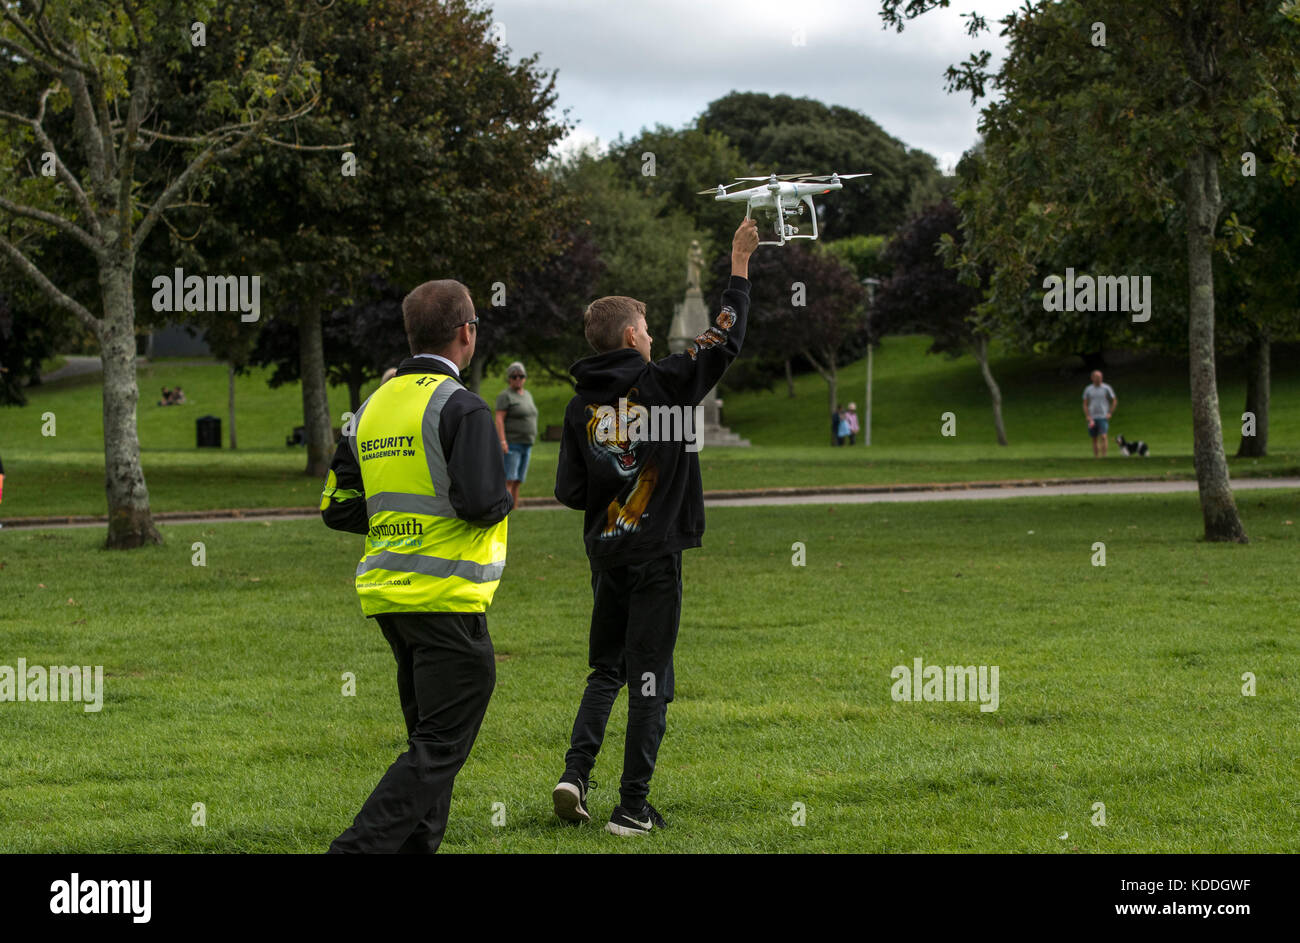 Plymouth, UK. 28th August, 2017. Drone flying is fast becoming a social headache for security in public places Plymouth Hoe. Sean Hernon/Alamy Stock Photo